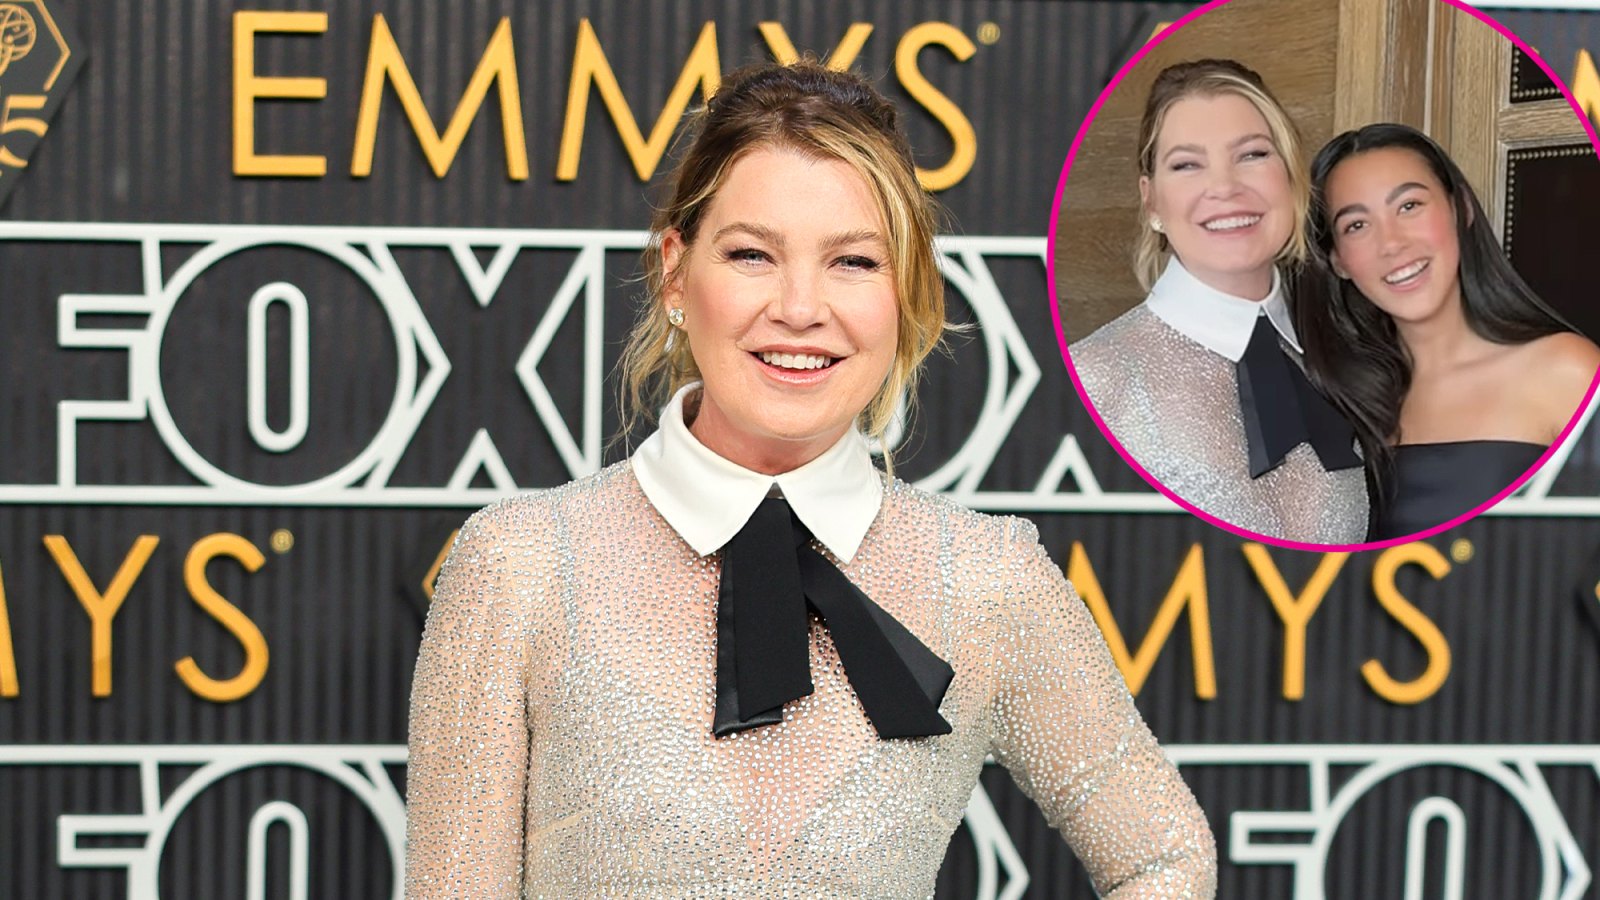 Ellen Pompeo Had the Best Night at the 2023 Emmys With Daughter Stella as Her Date